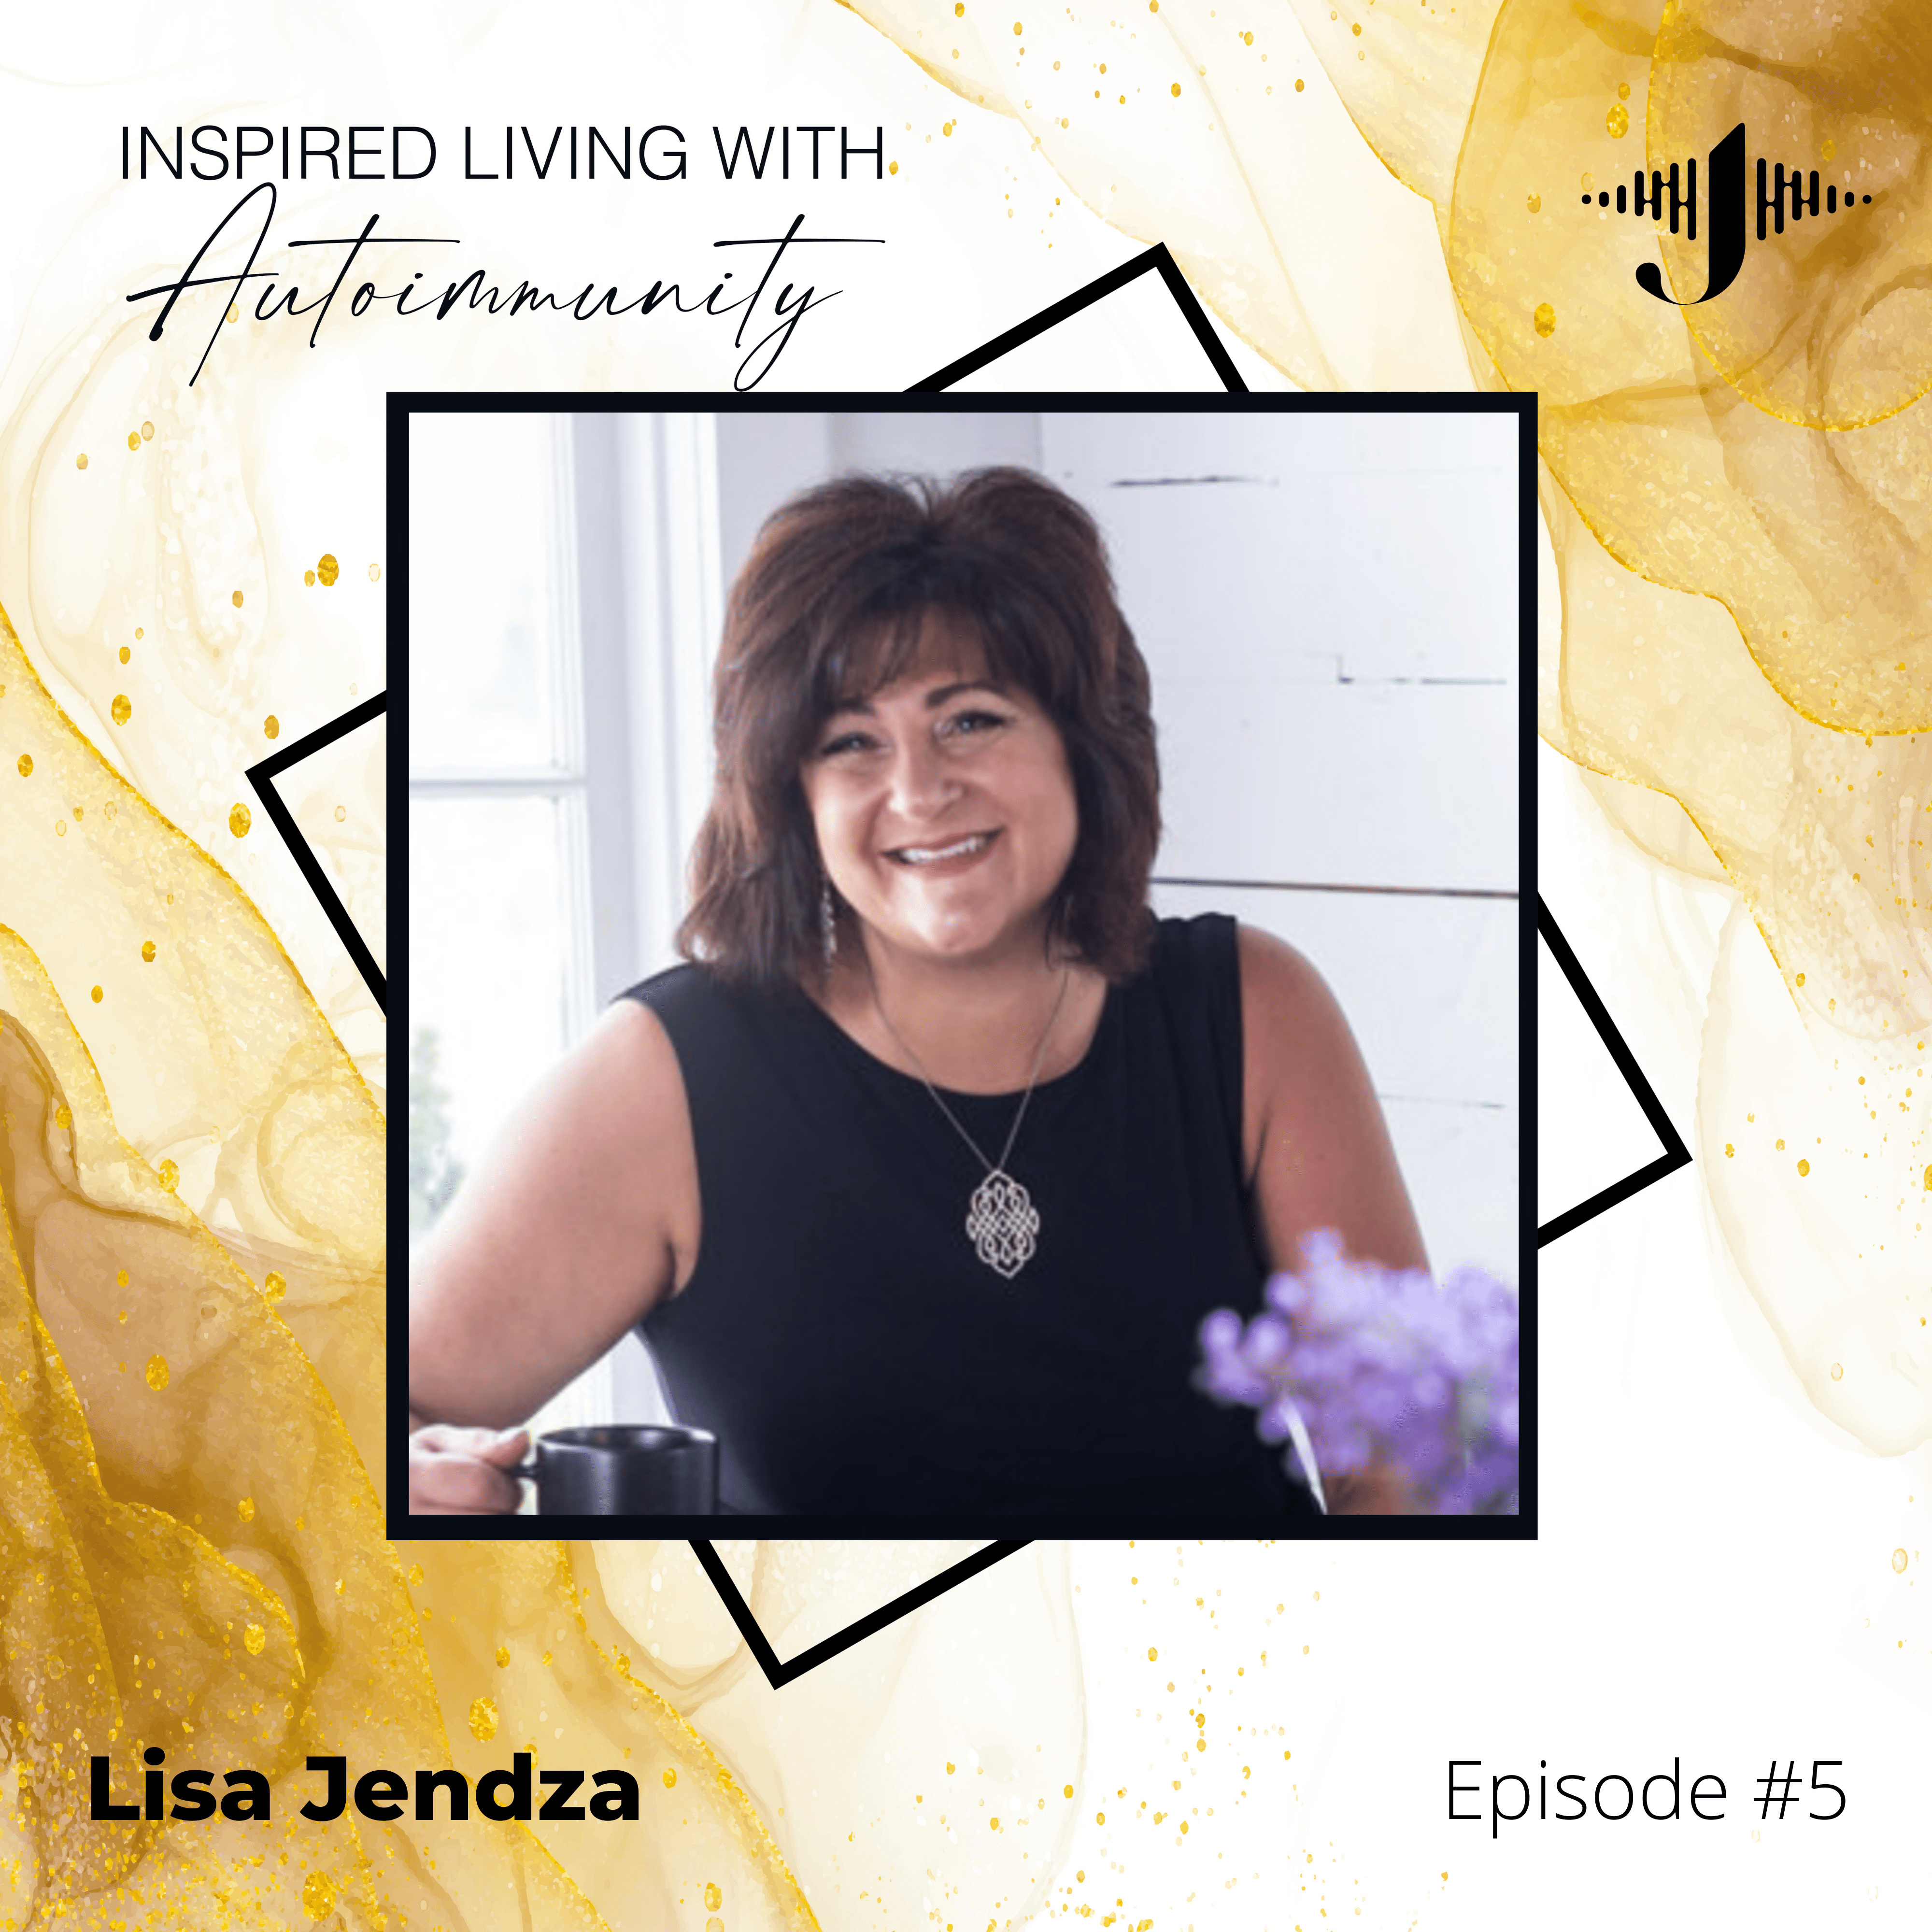 Lisa Jendza: From Confusion to Clarity